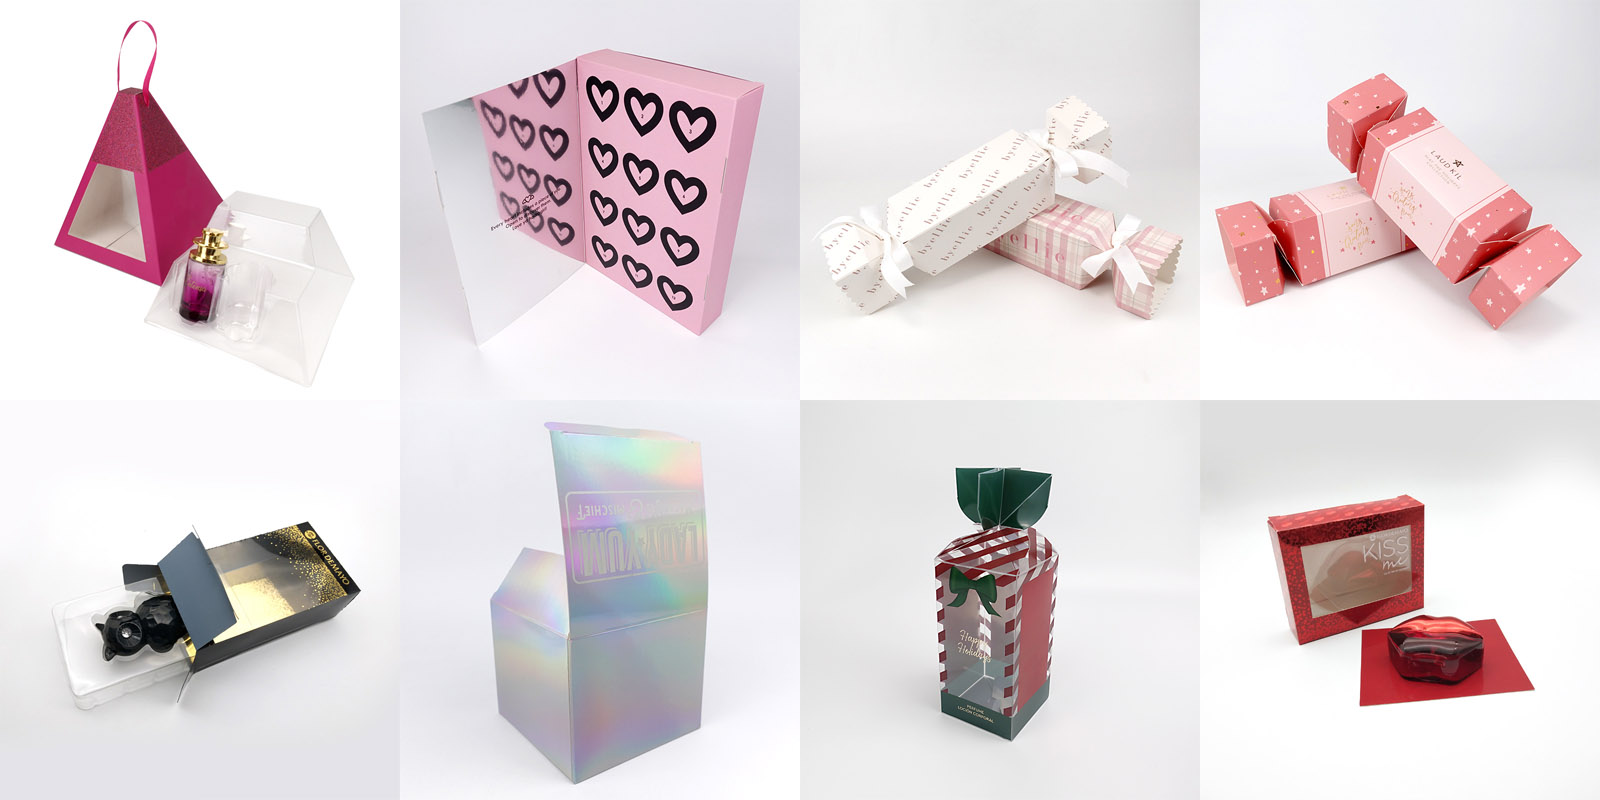 Customize cosmetics packaging boxes belonging to your brand